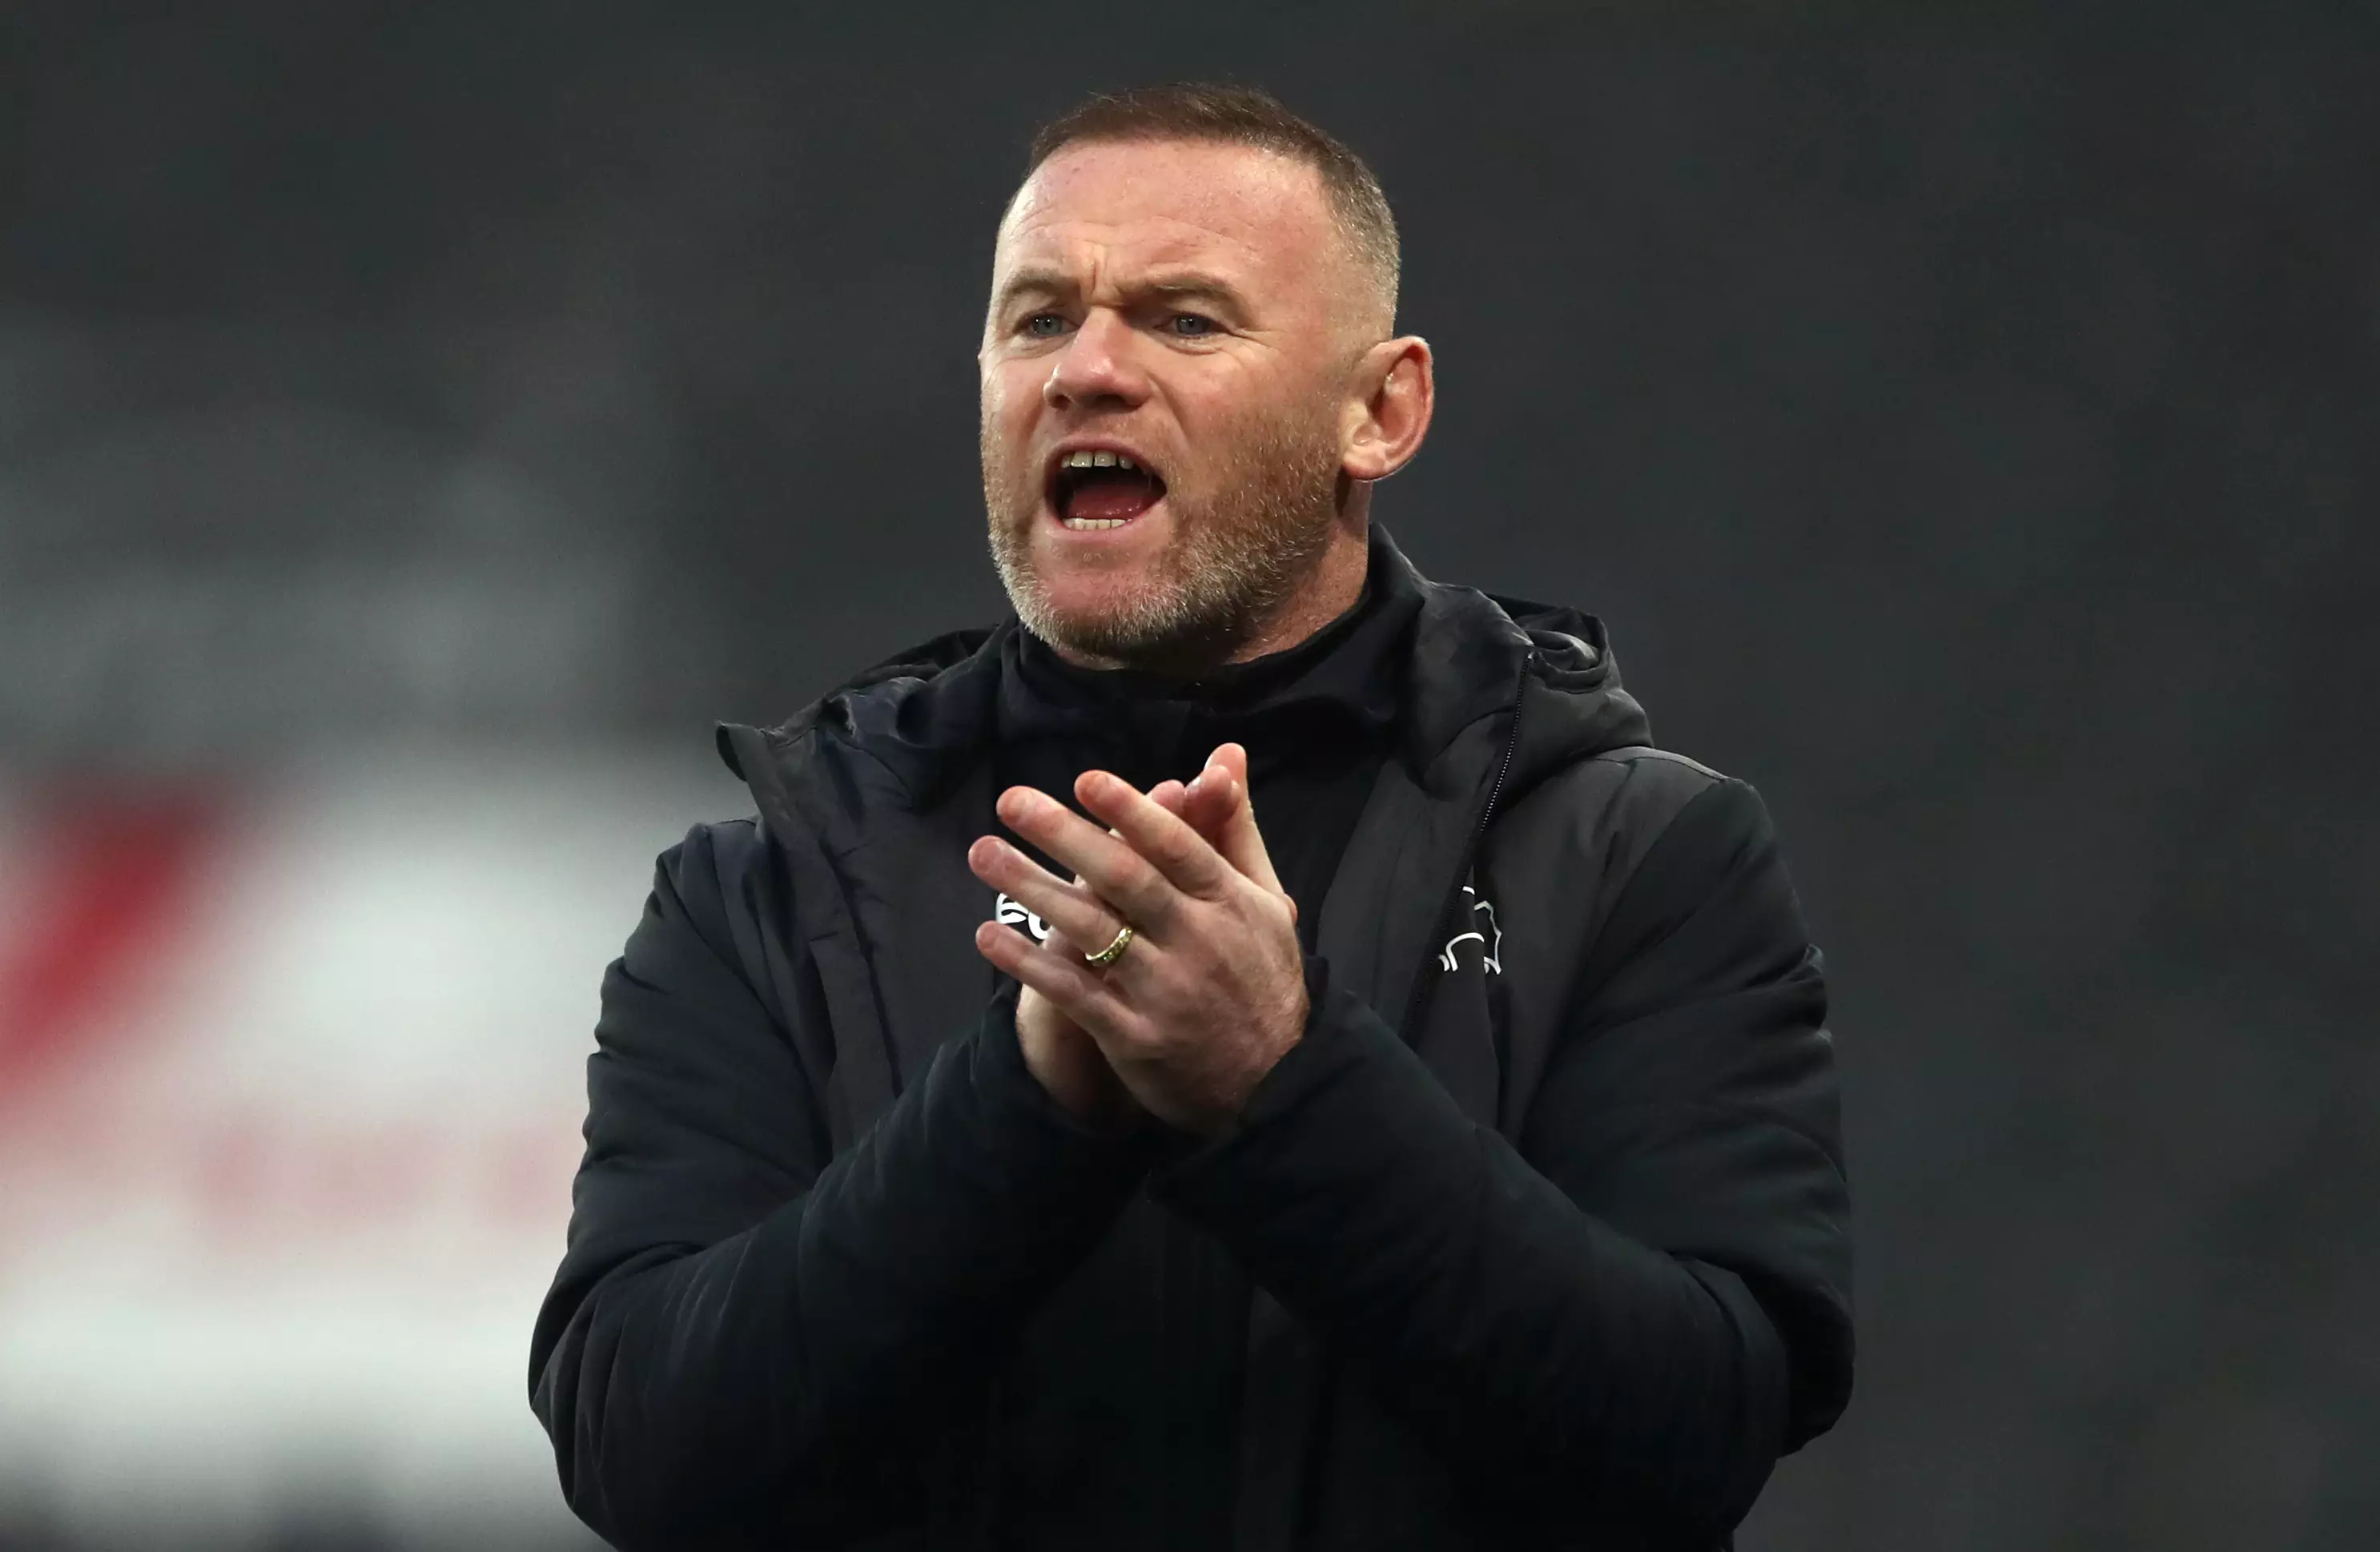 Rooney is now caretaker manager at Derby. Image: PA Images